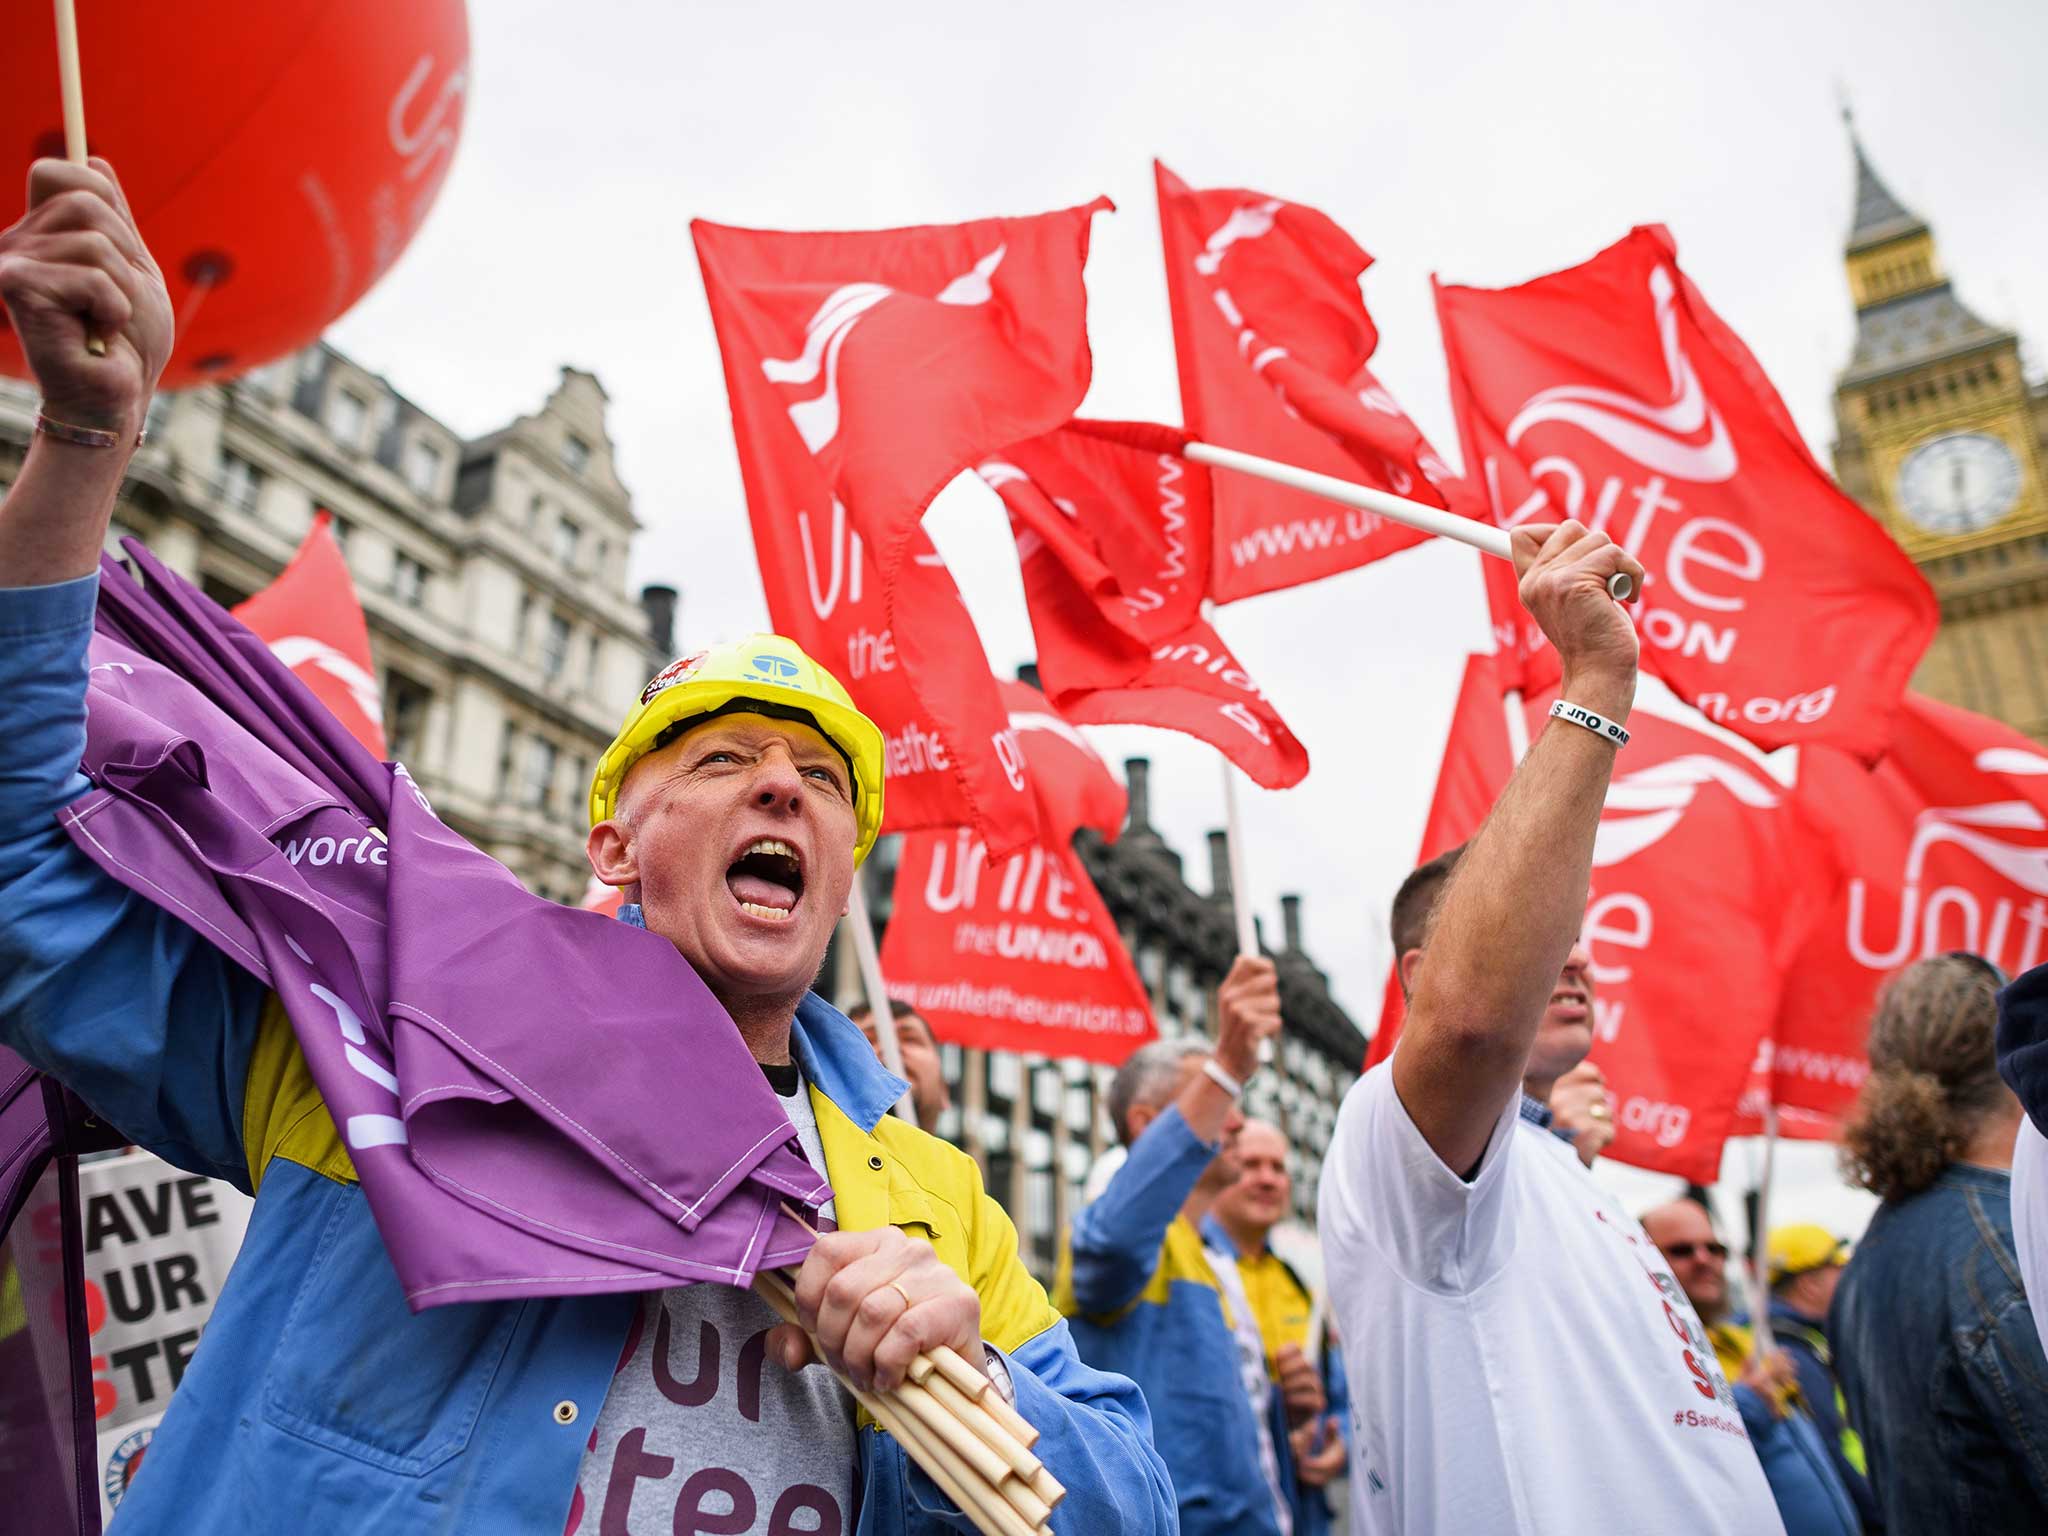 Steel workers wave banners as they take part in protest march through central London